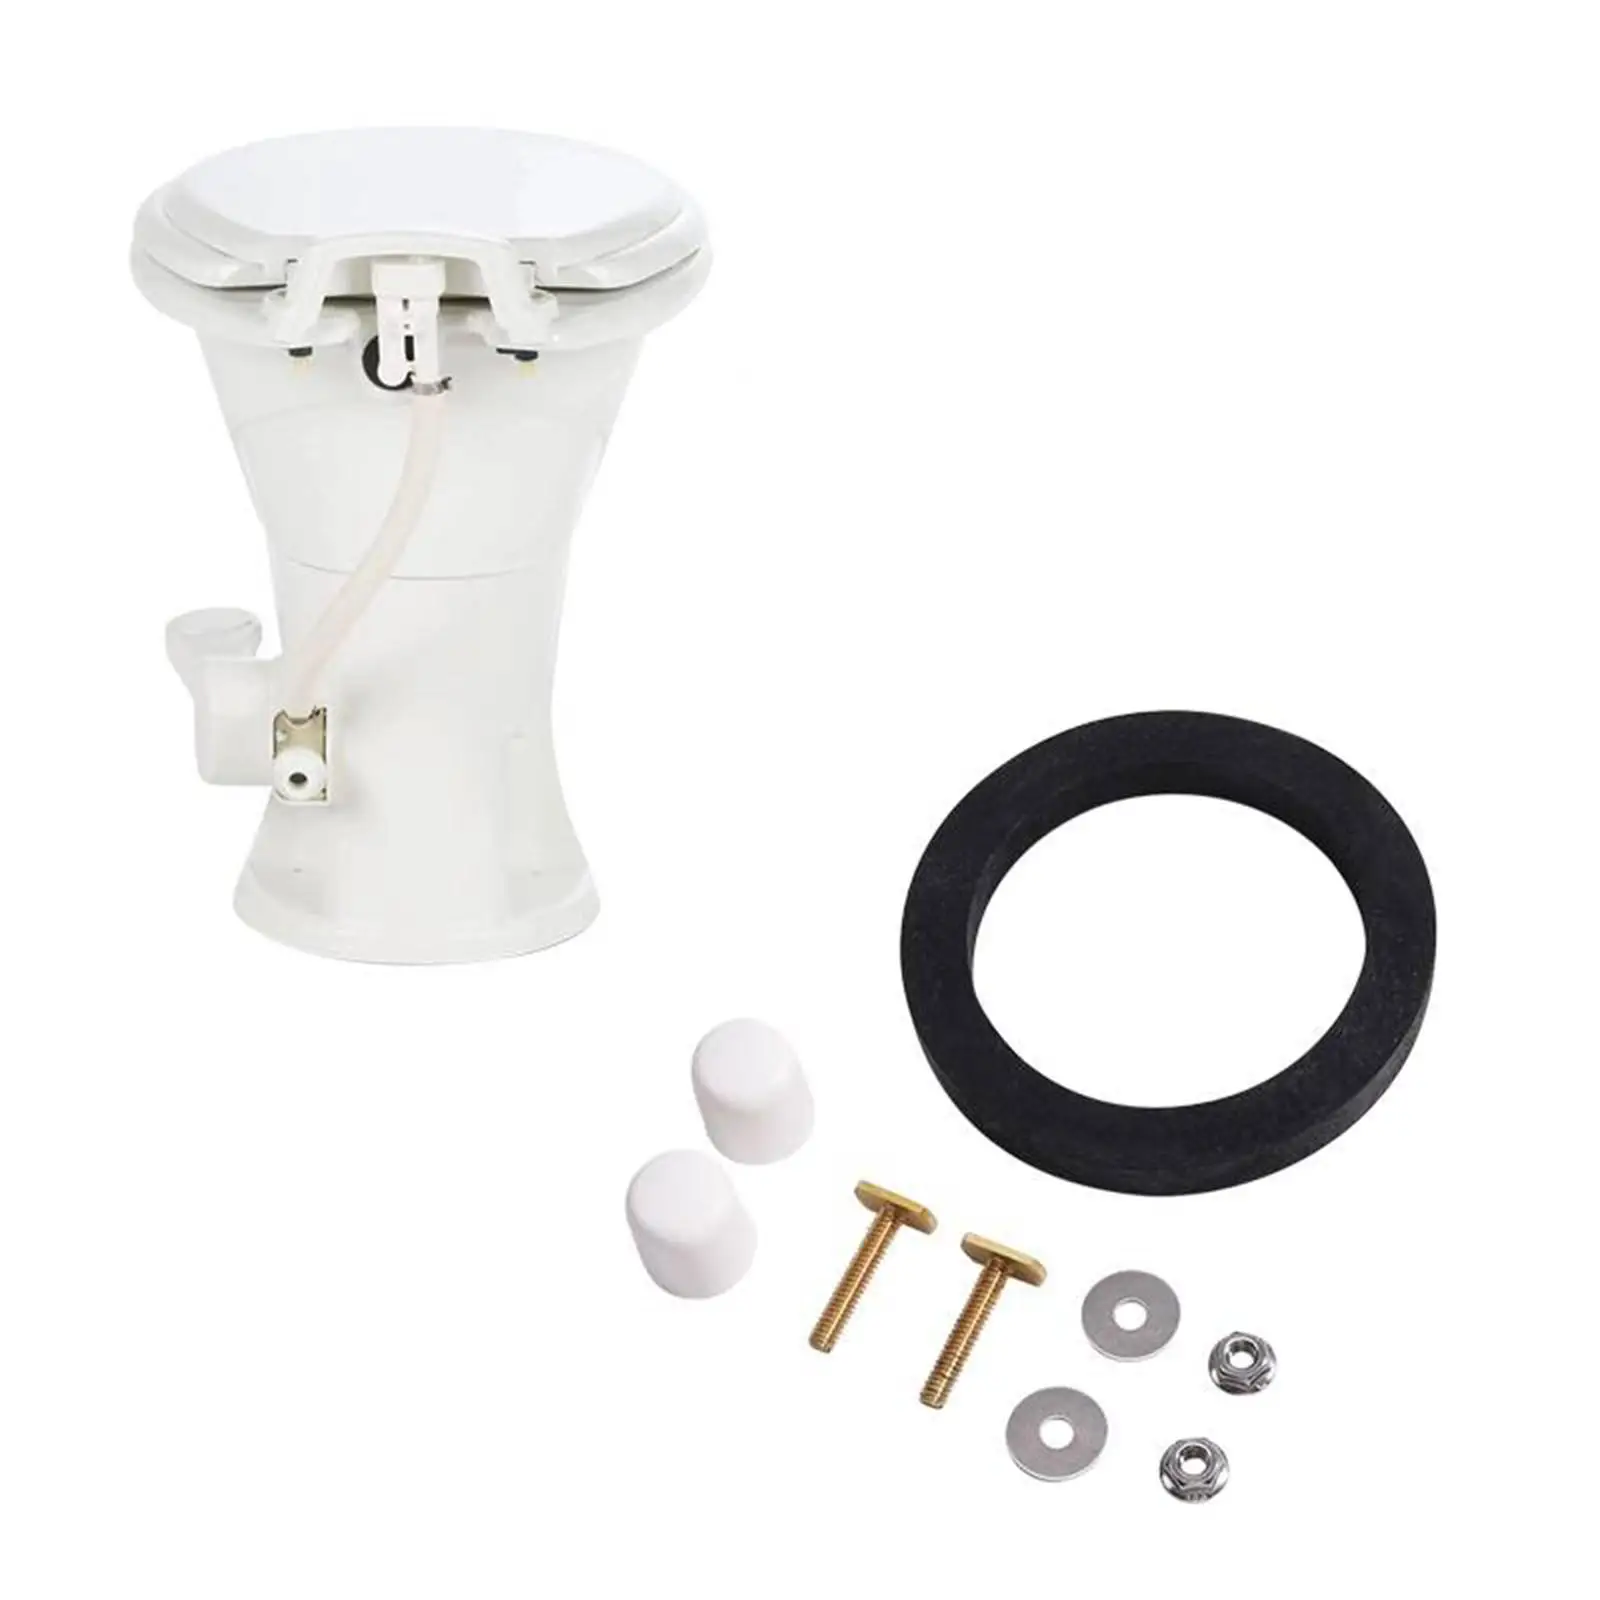 RV Toilet Toilet Mounting Hardware Kit for Dometic 300 Series Toilets Stable Performance Easy to Install Toilet Accessories